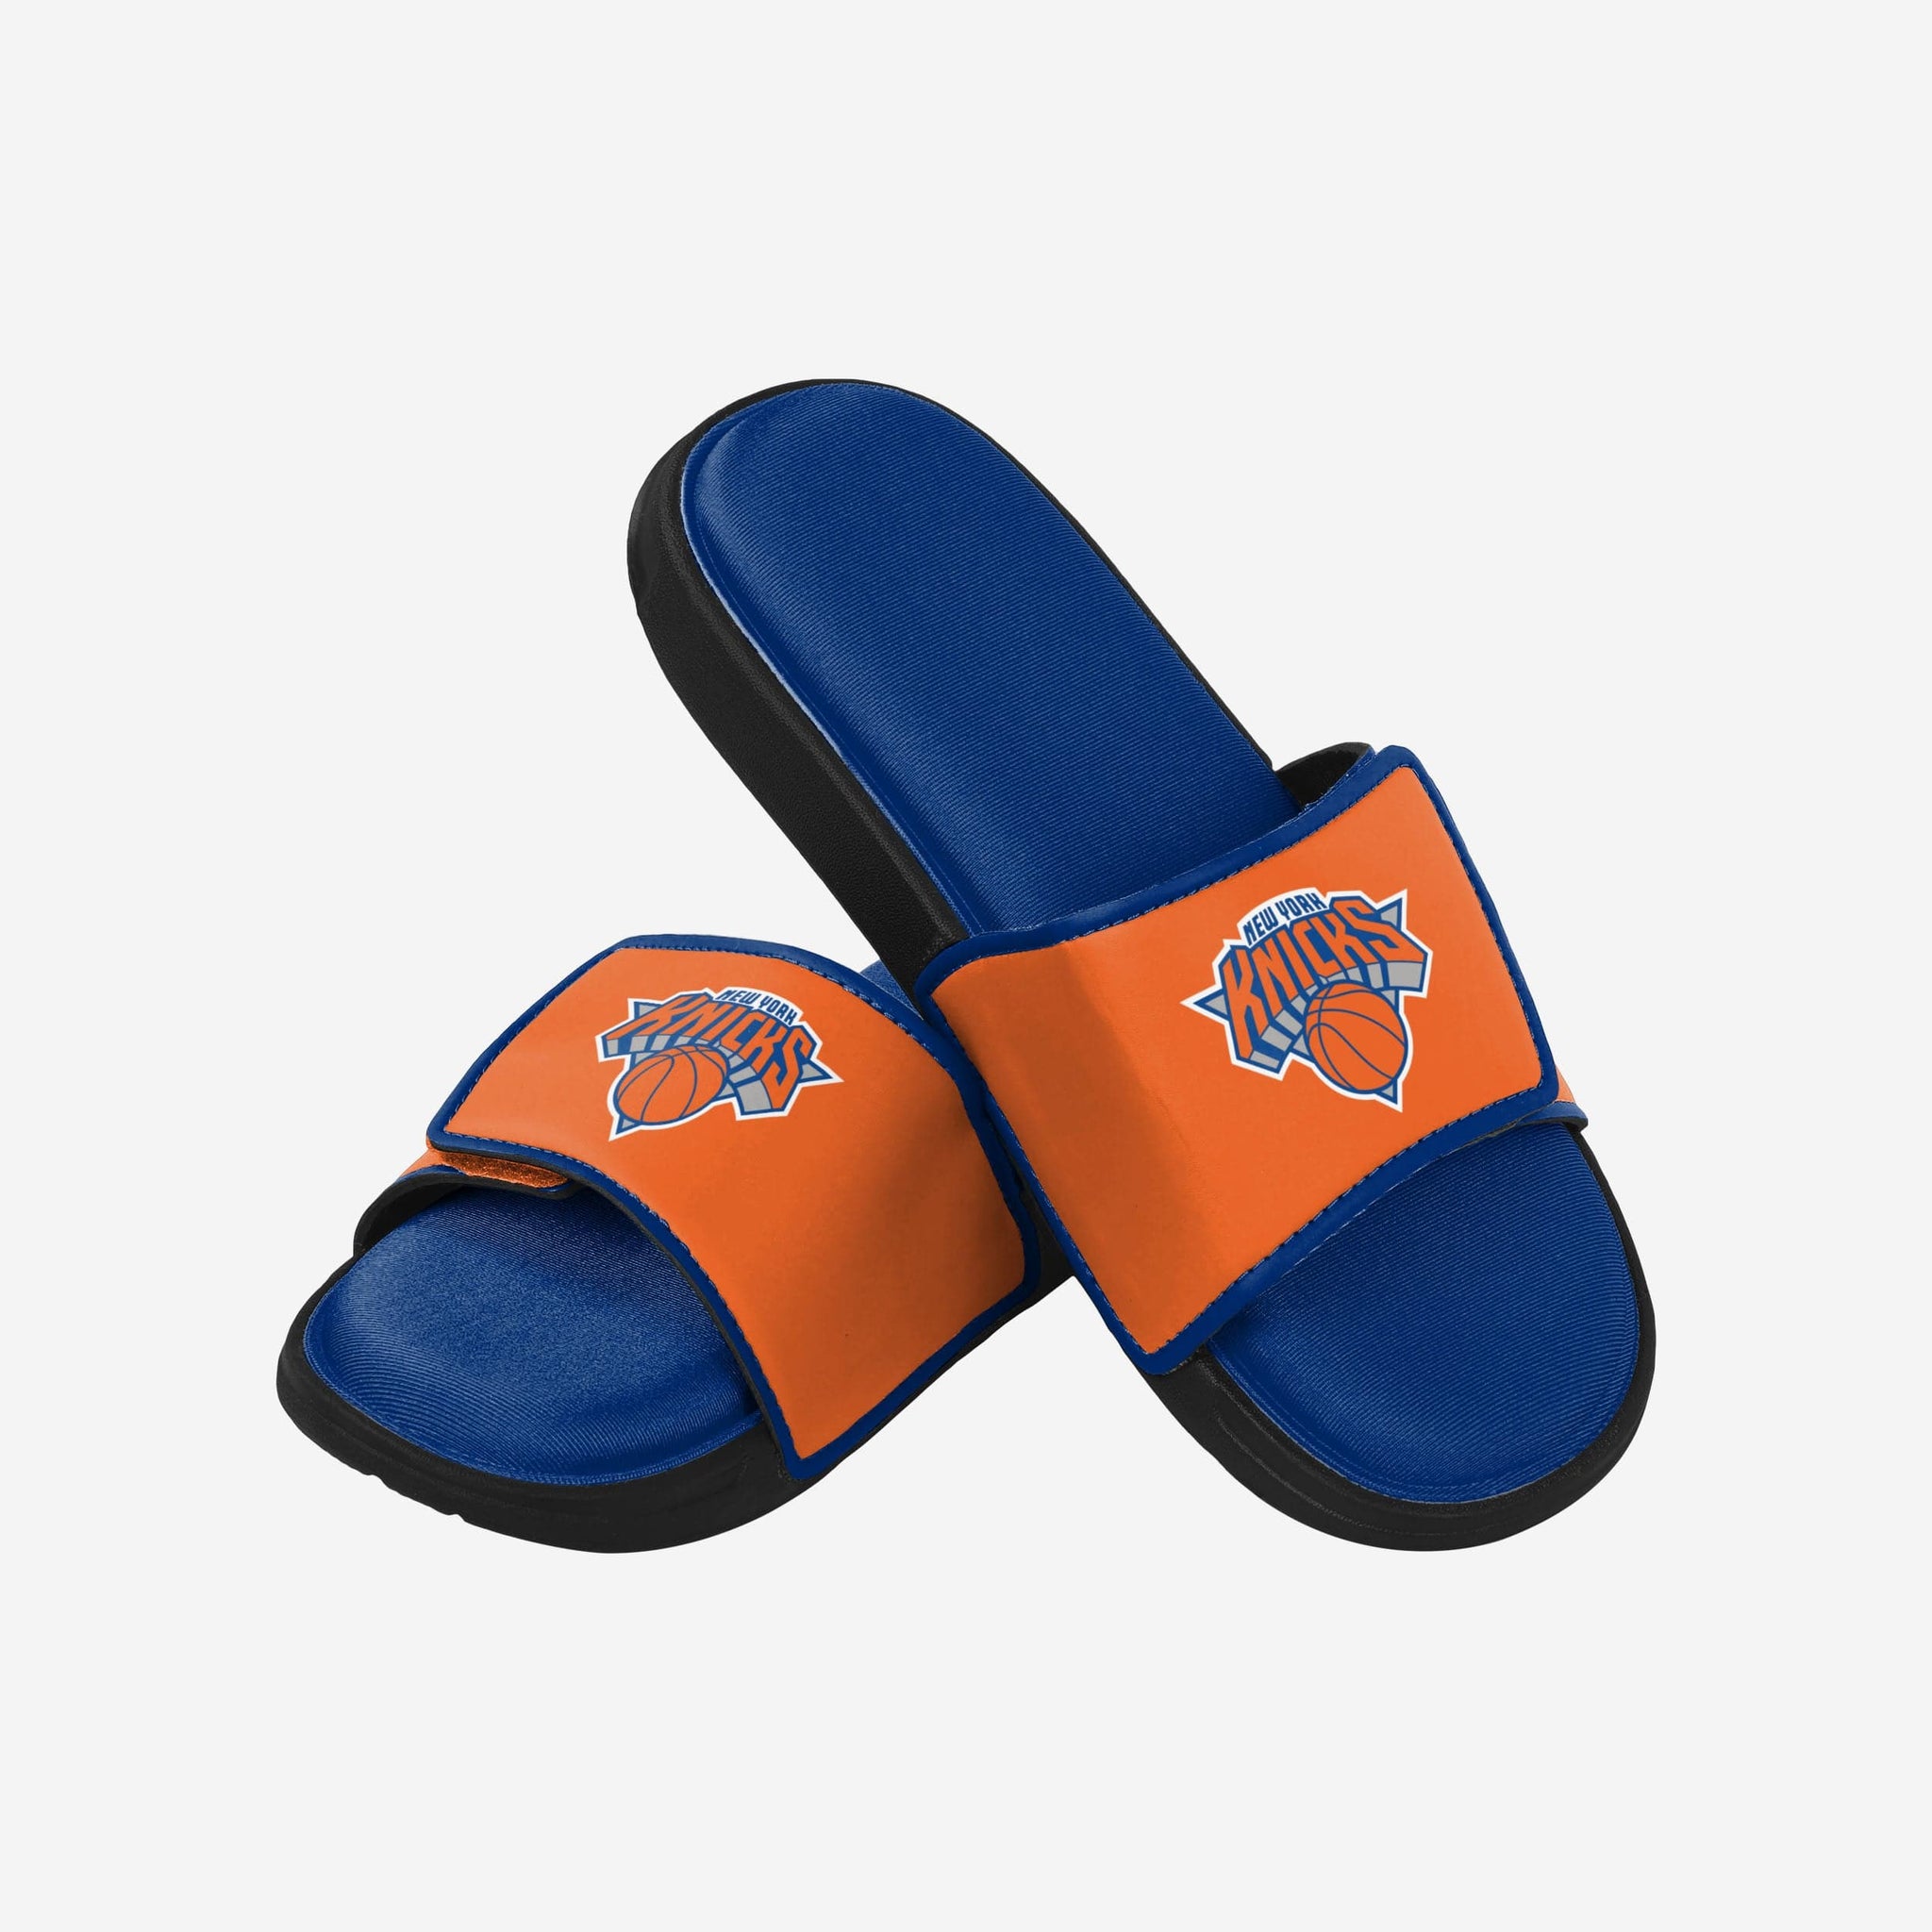 New York Knicks Apparel, Collectibles, and Fan Gear. FOCO